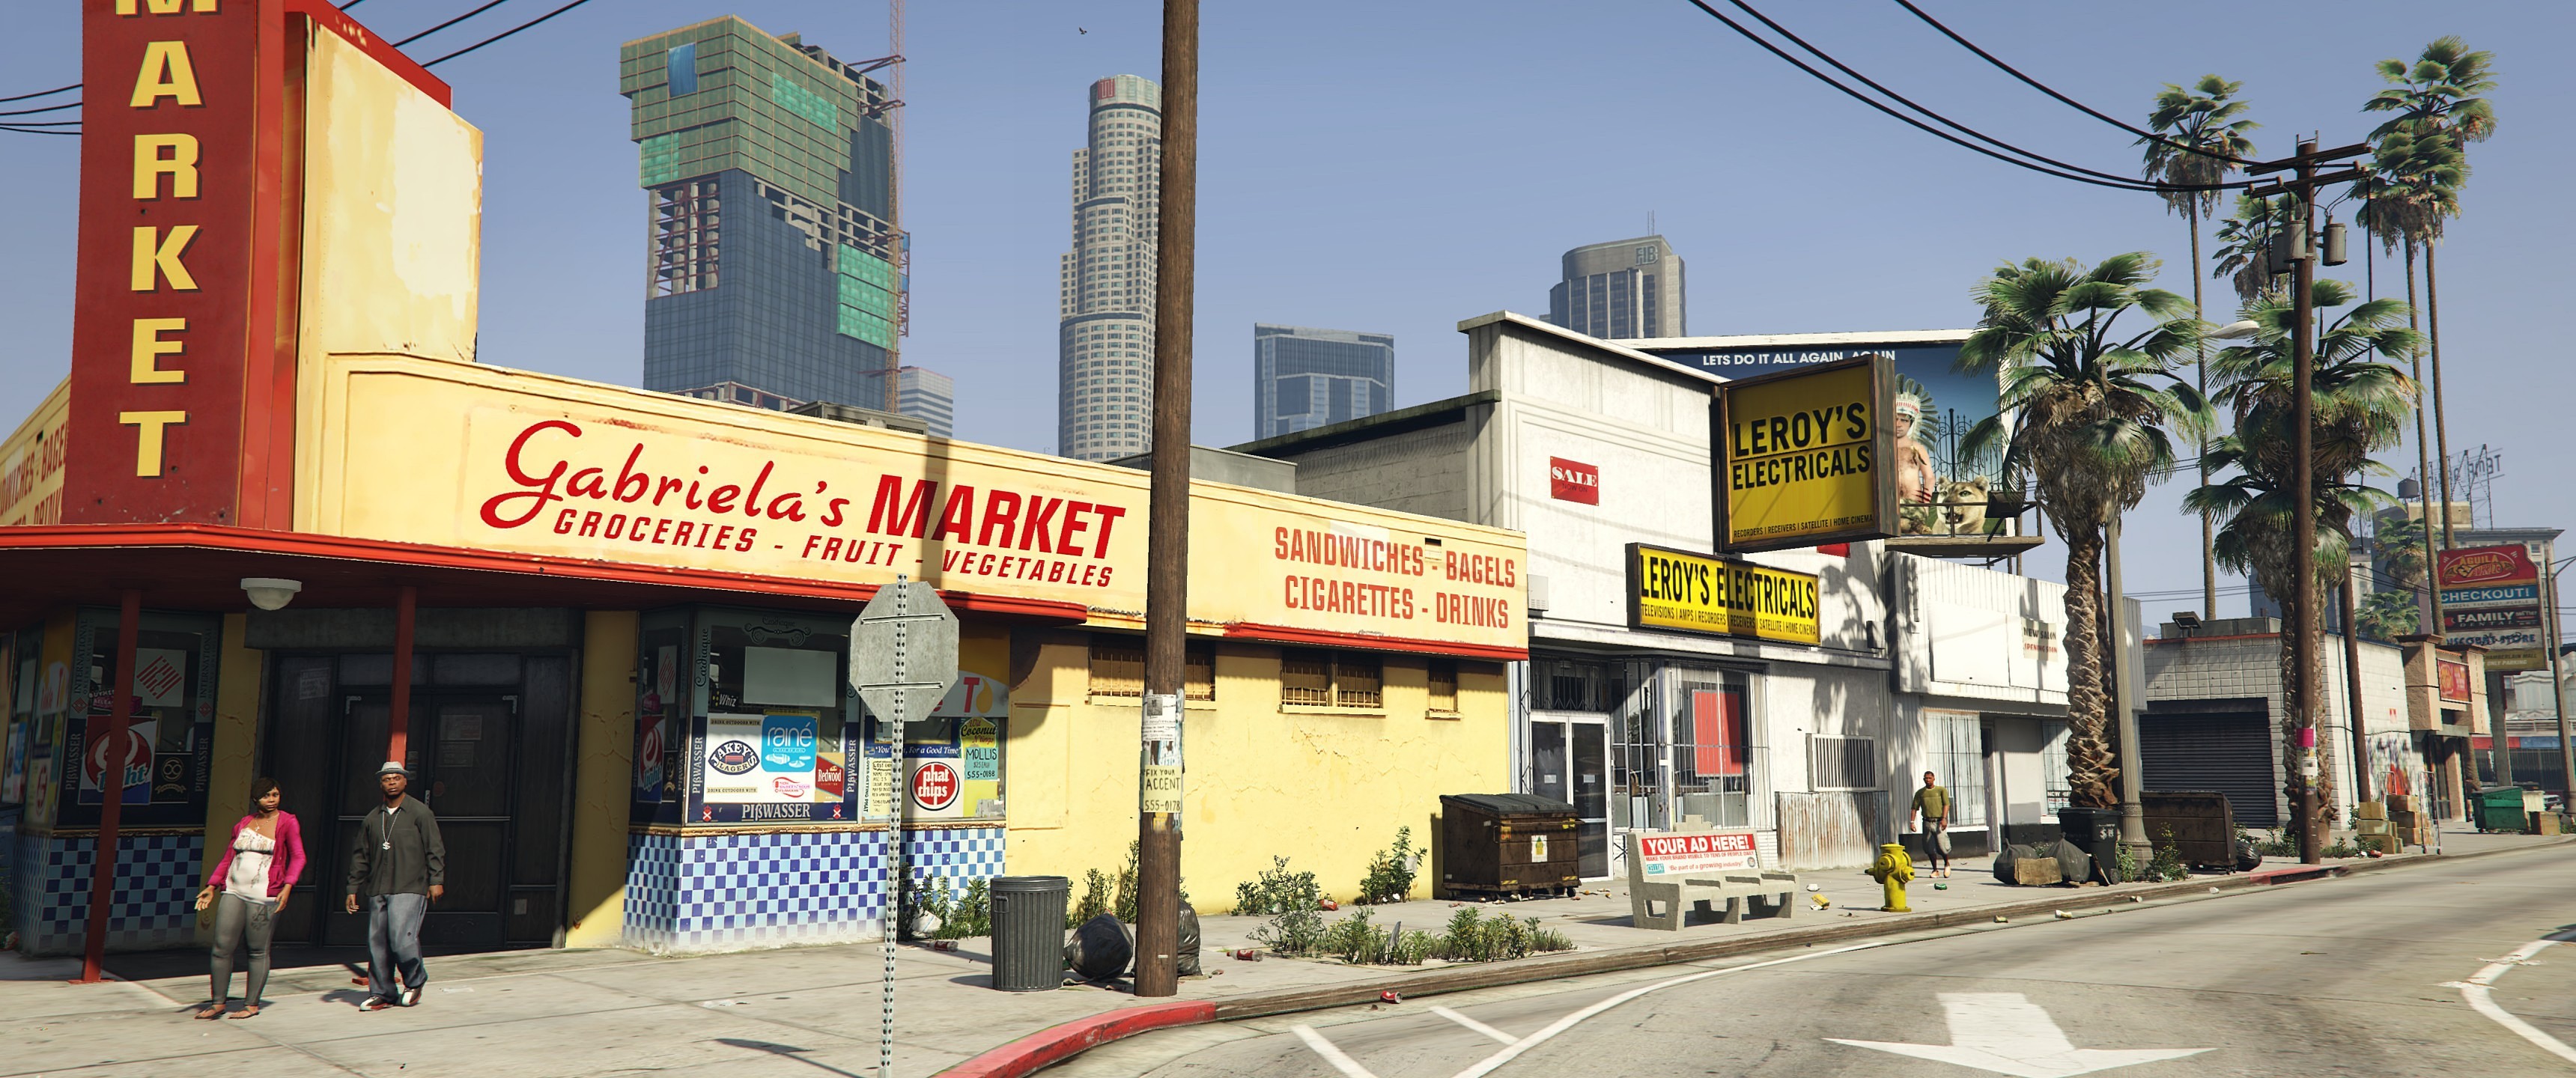 3440x1440p grand theft auto v wallpapers